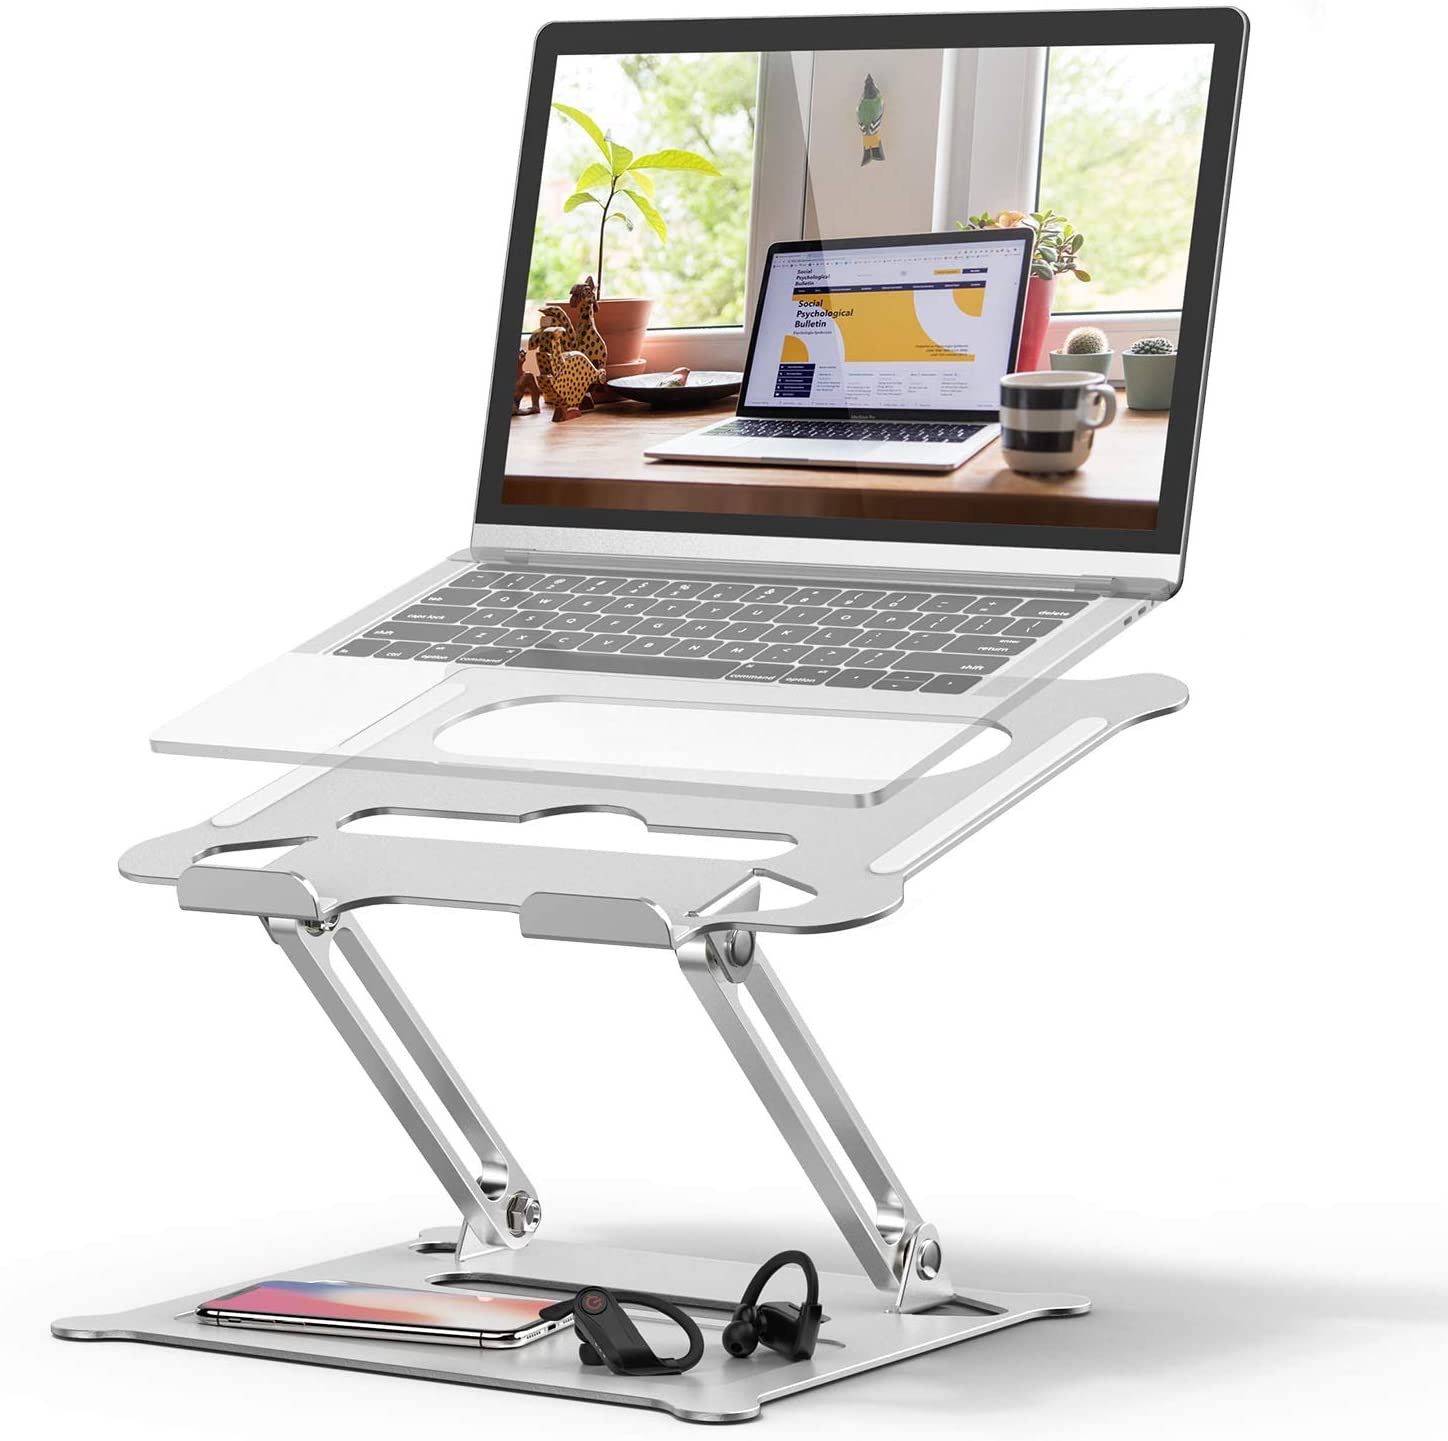 A Duchy adjustable laptop stand supporting a laptop with display on and a cellphone at its base